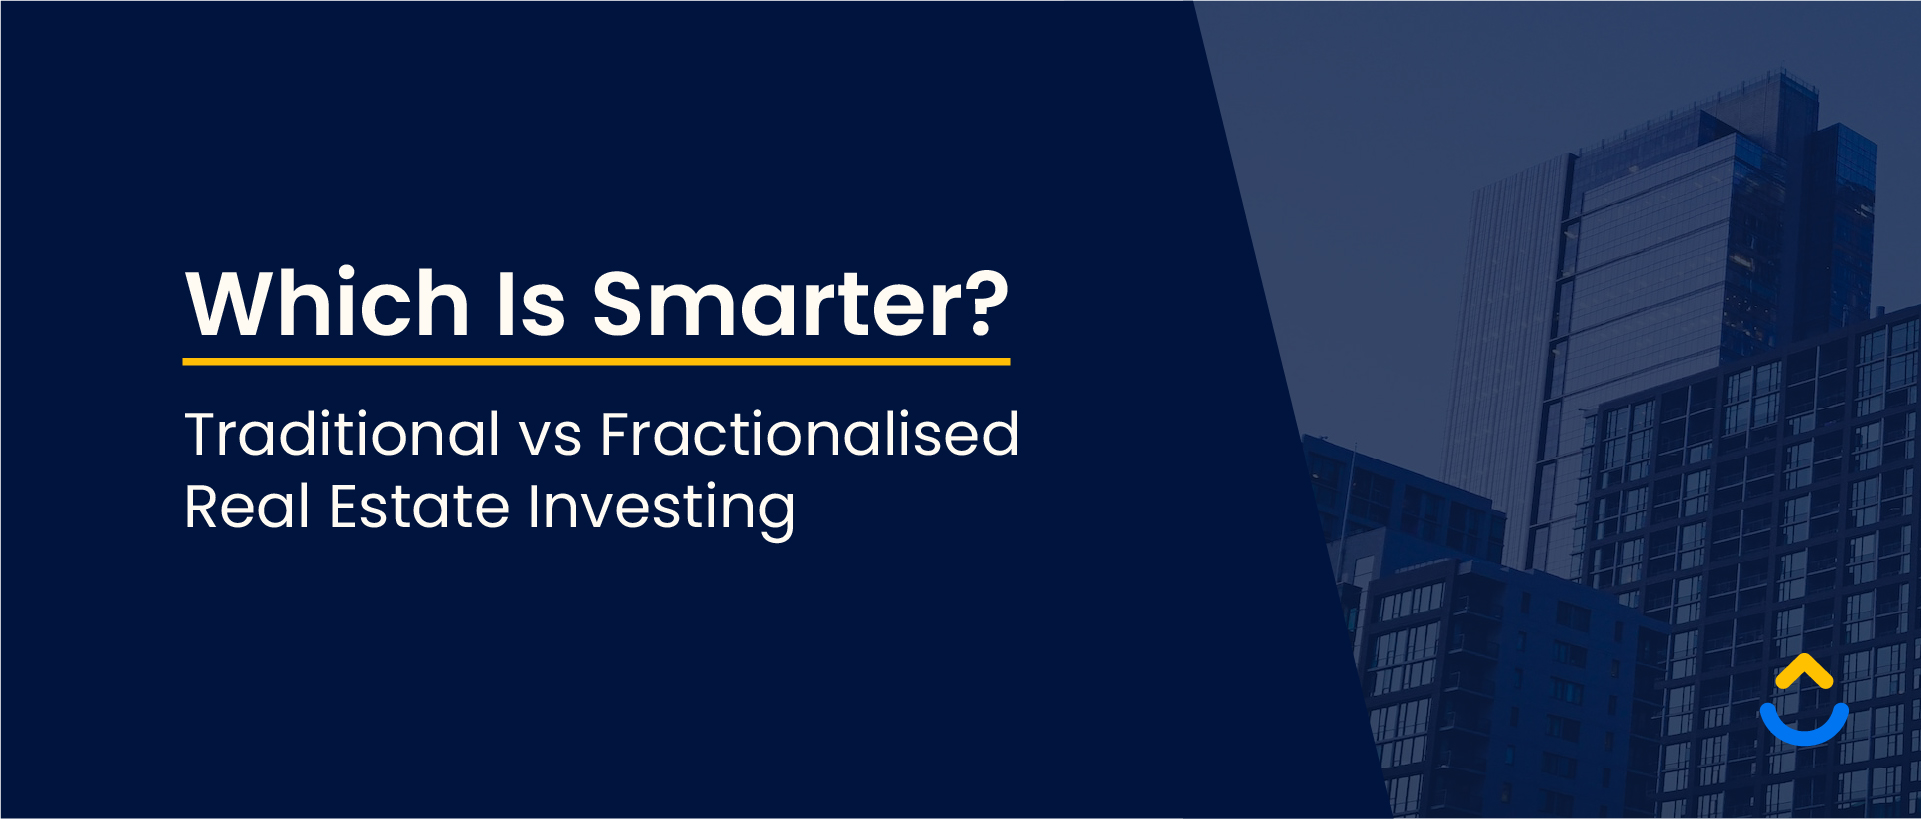 Traditional vs Fractionalized Real Estate Investing